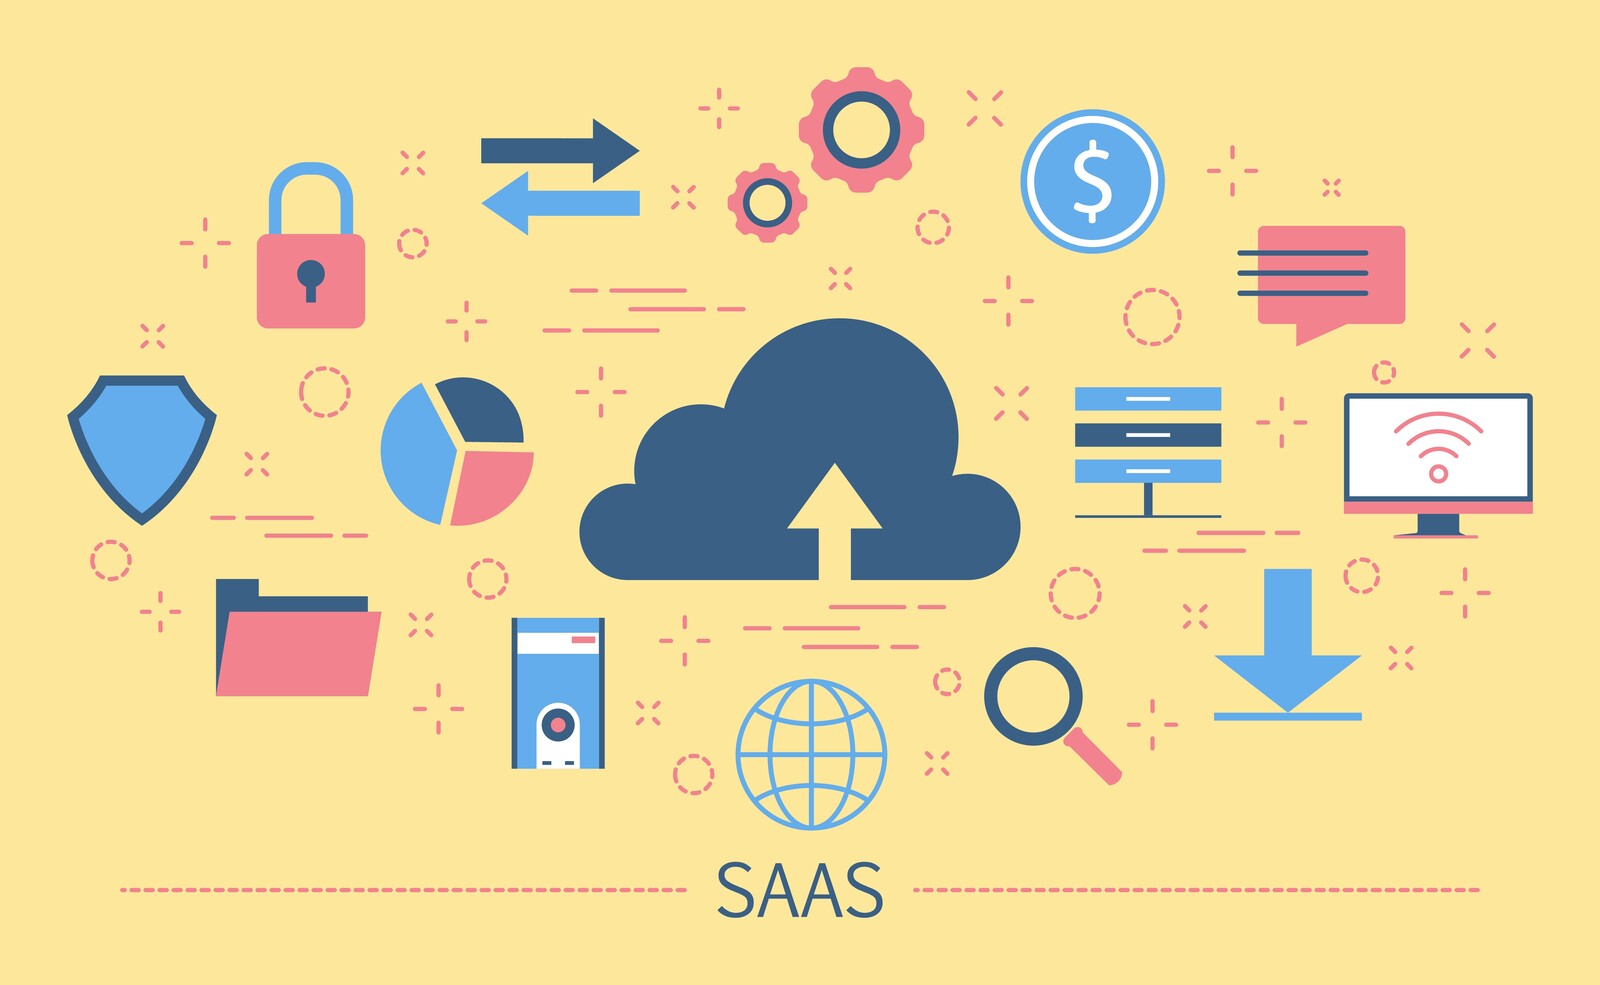 A Step-by-Step Approach to Creating a SaaS Prototype